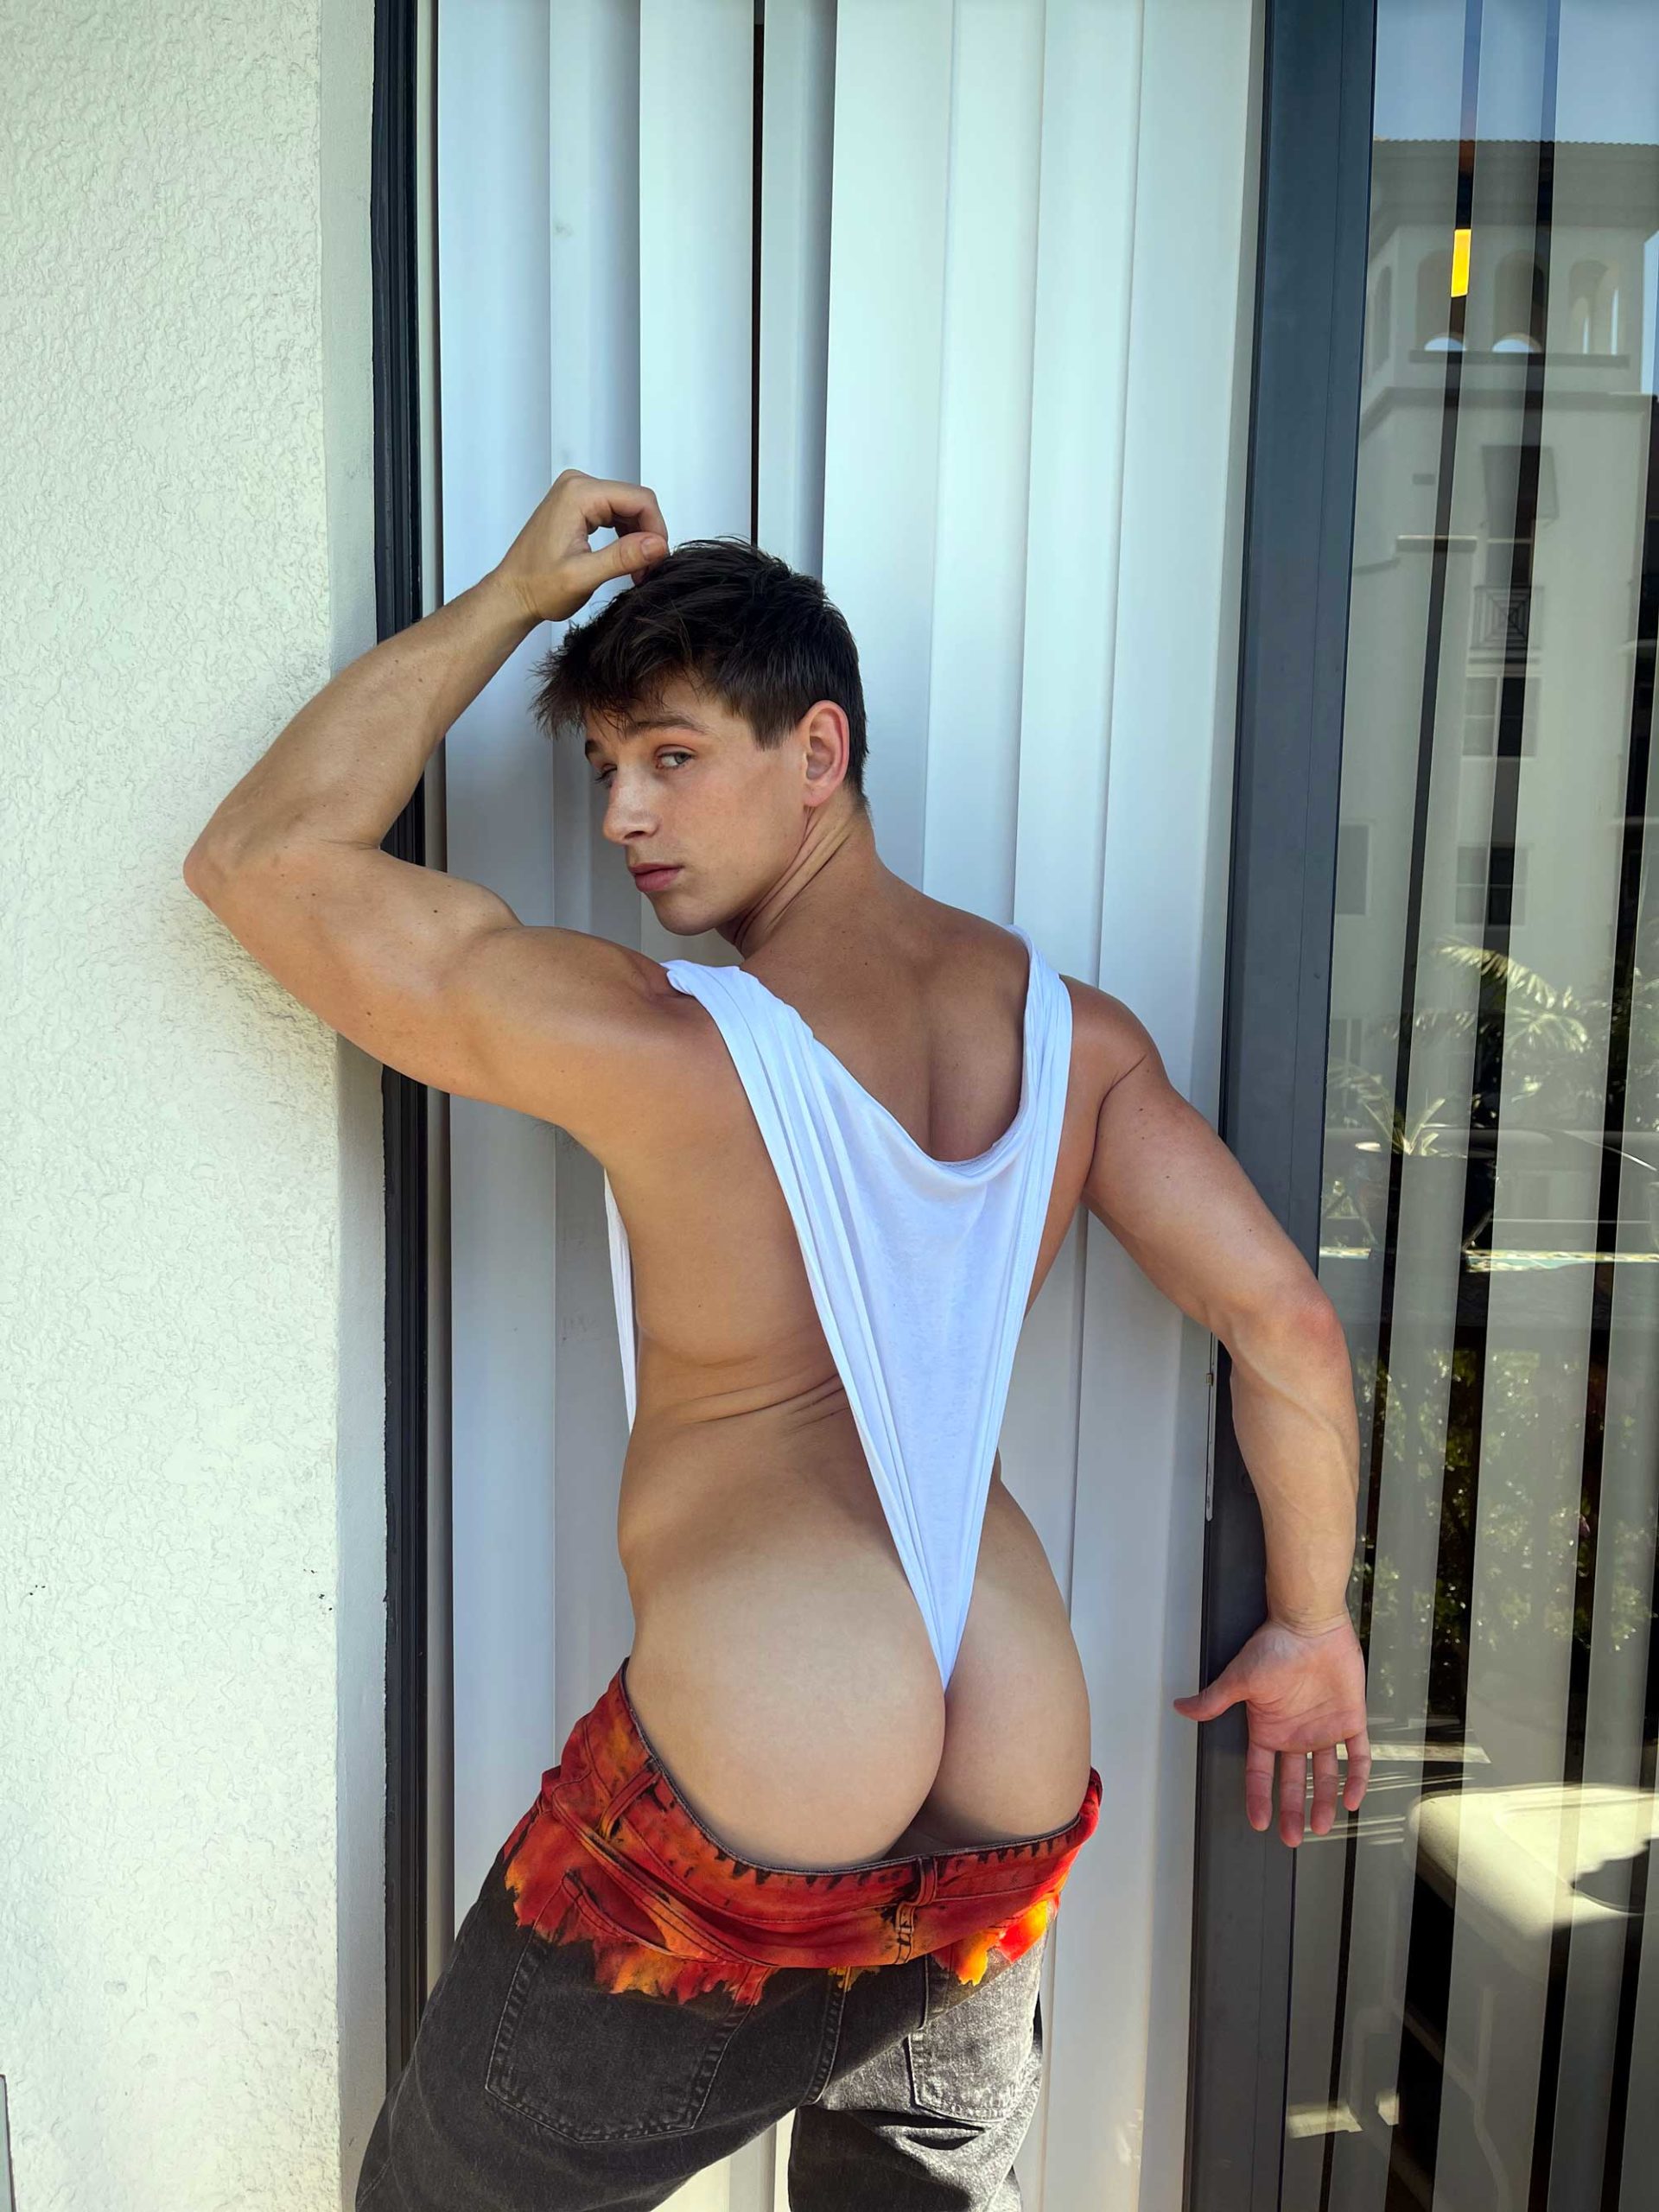 David Marshall, using his OnlyFans to make a difference » OnlyFans